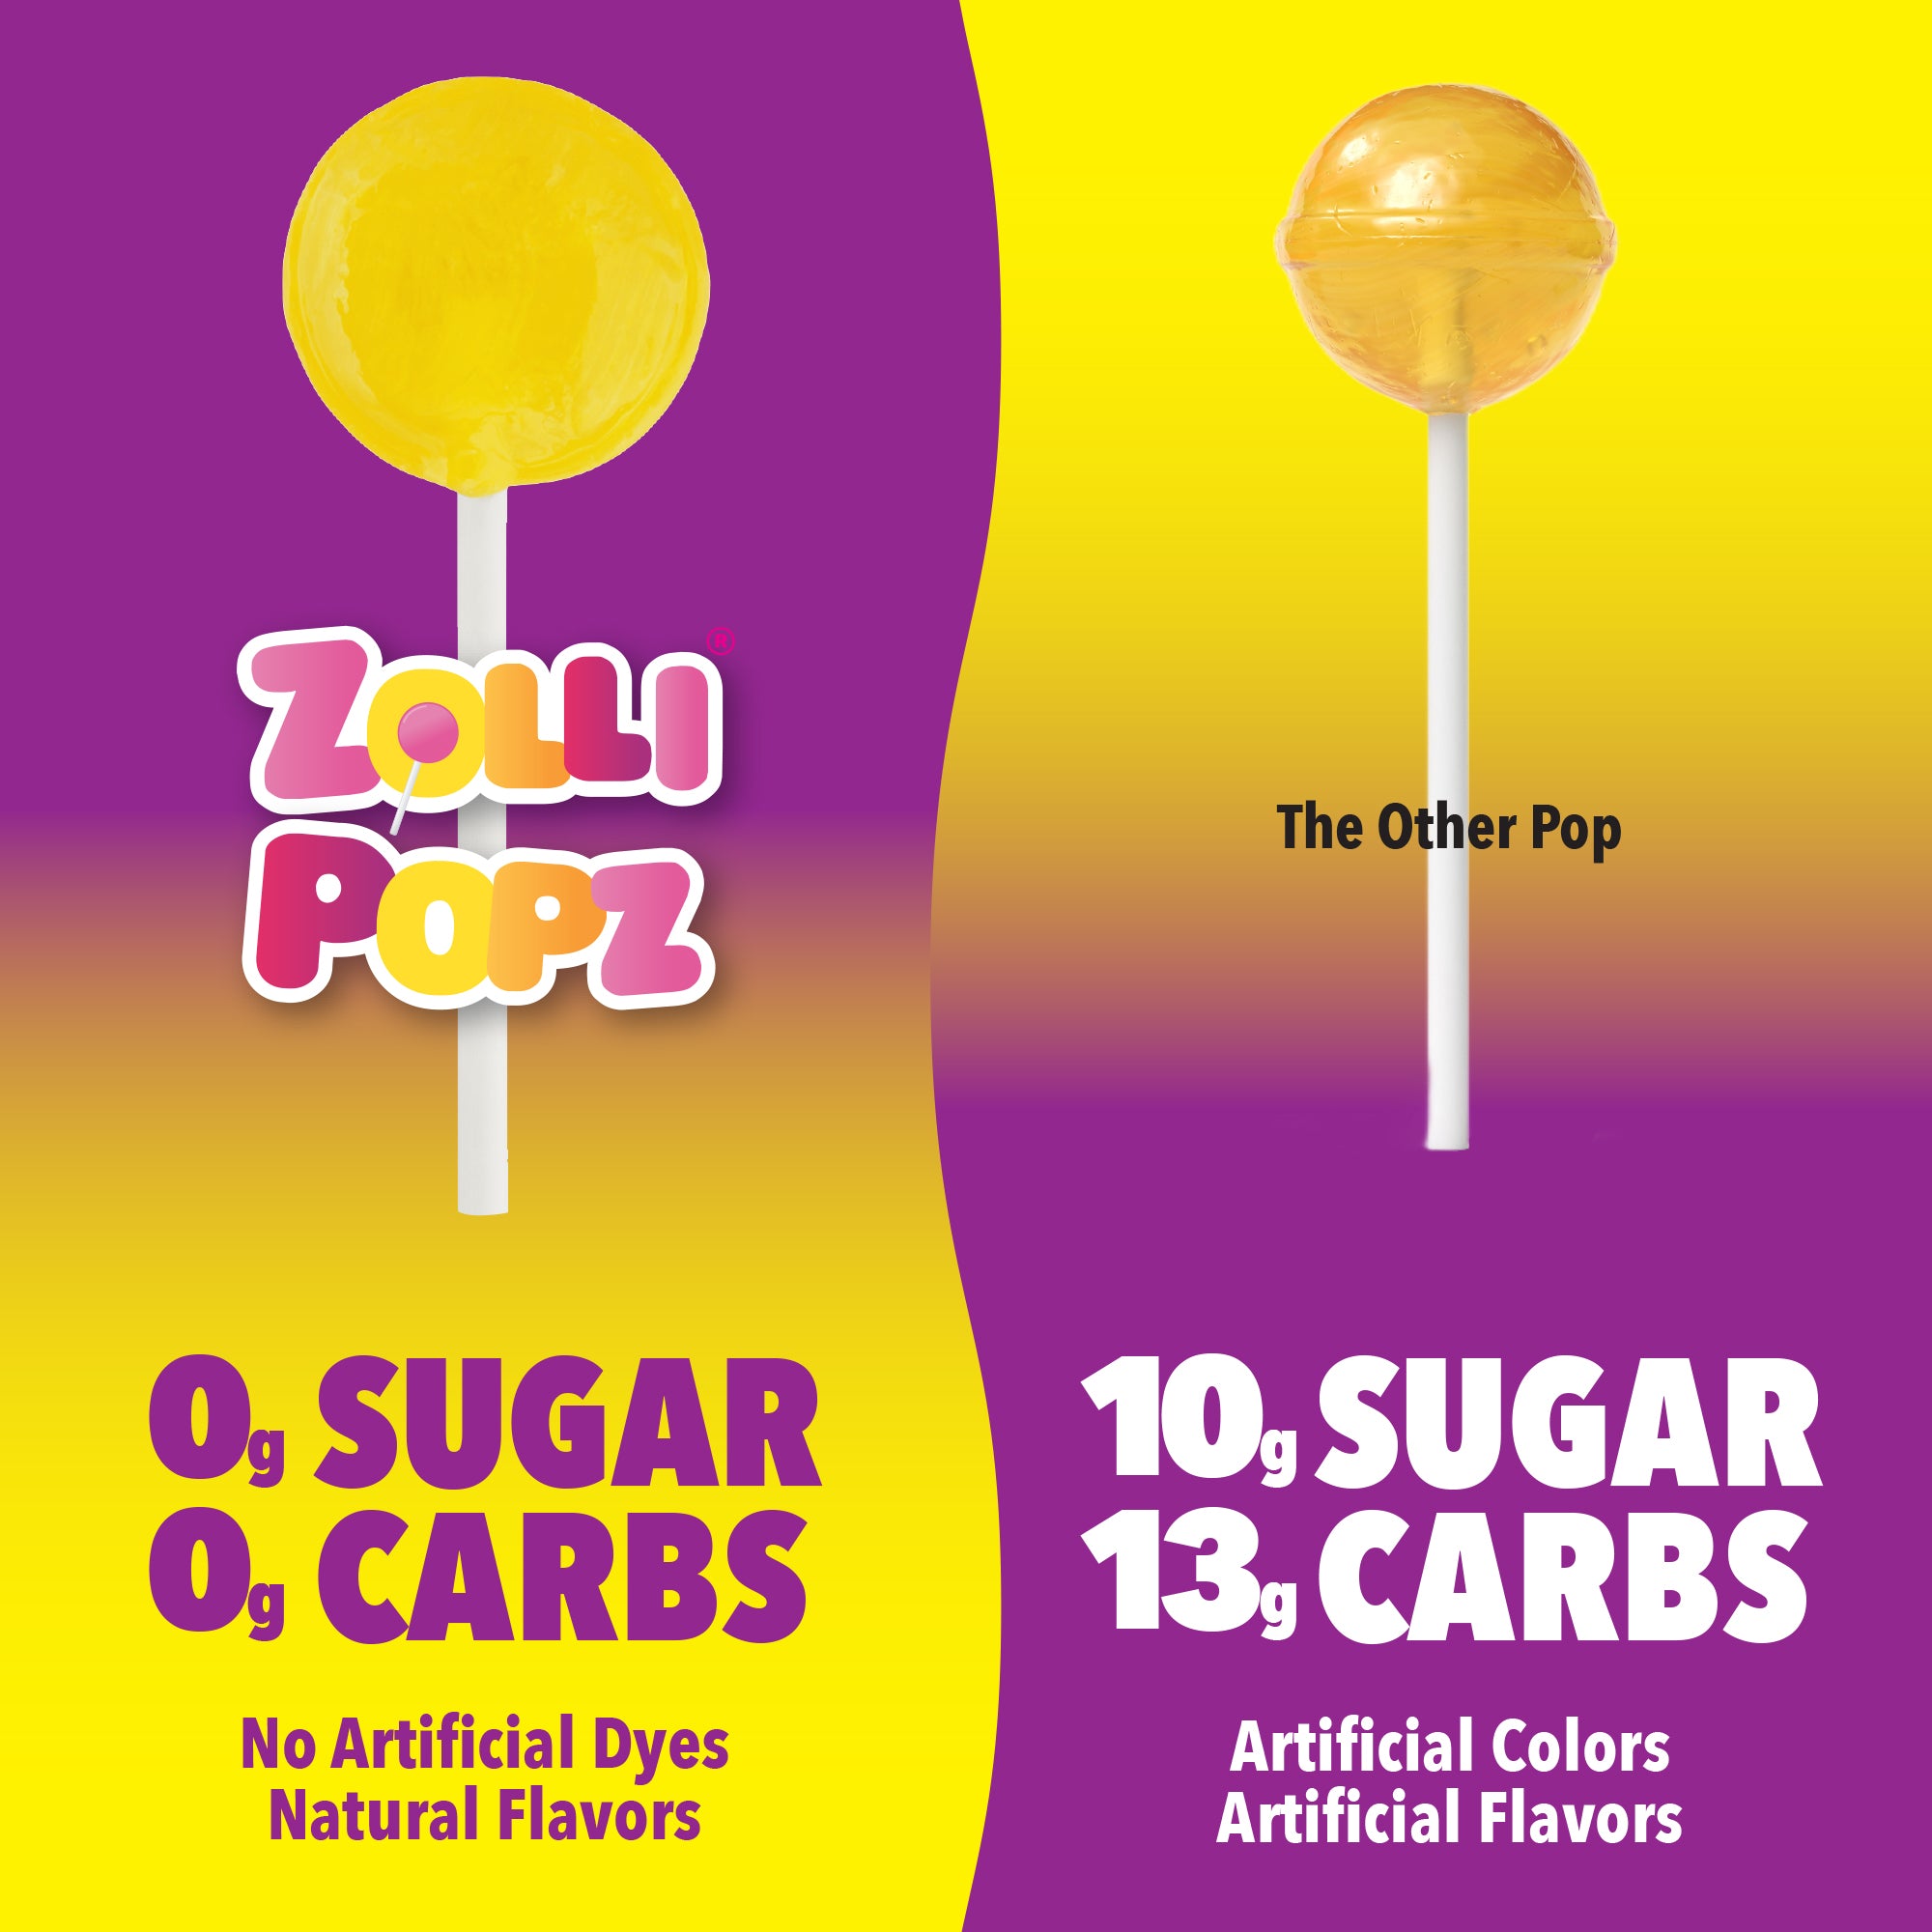 Zollipops Pineapple Clean Teeth Lollipops have no artificial dyes and have all natural flavors. Zero grams of sugar and 0 grams of carbs